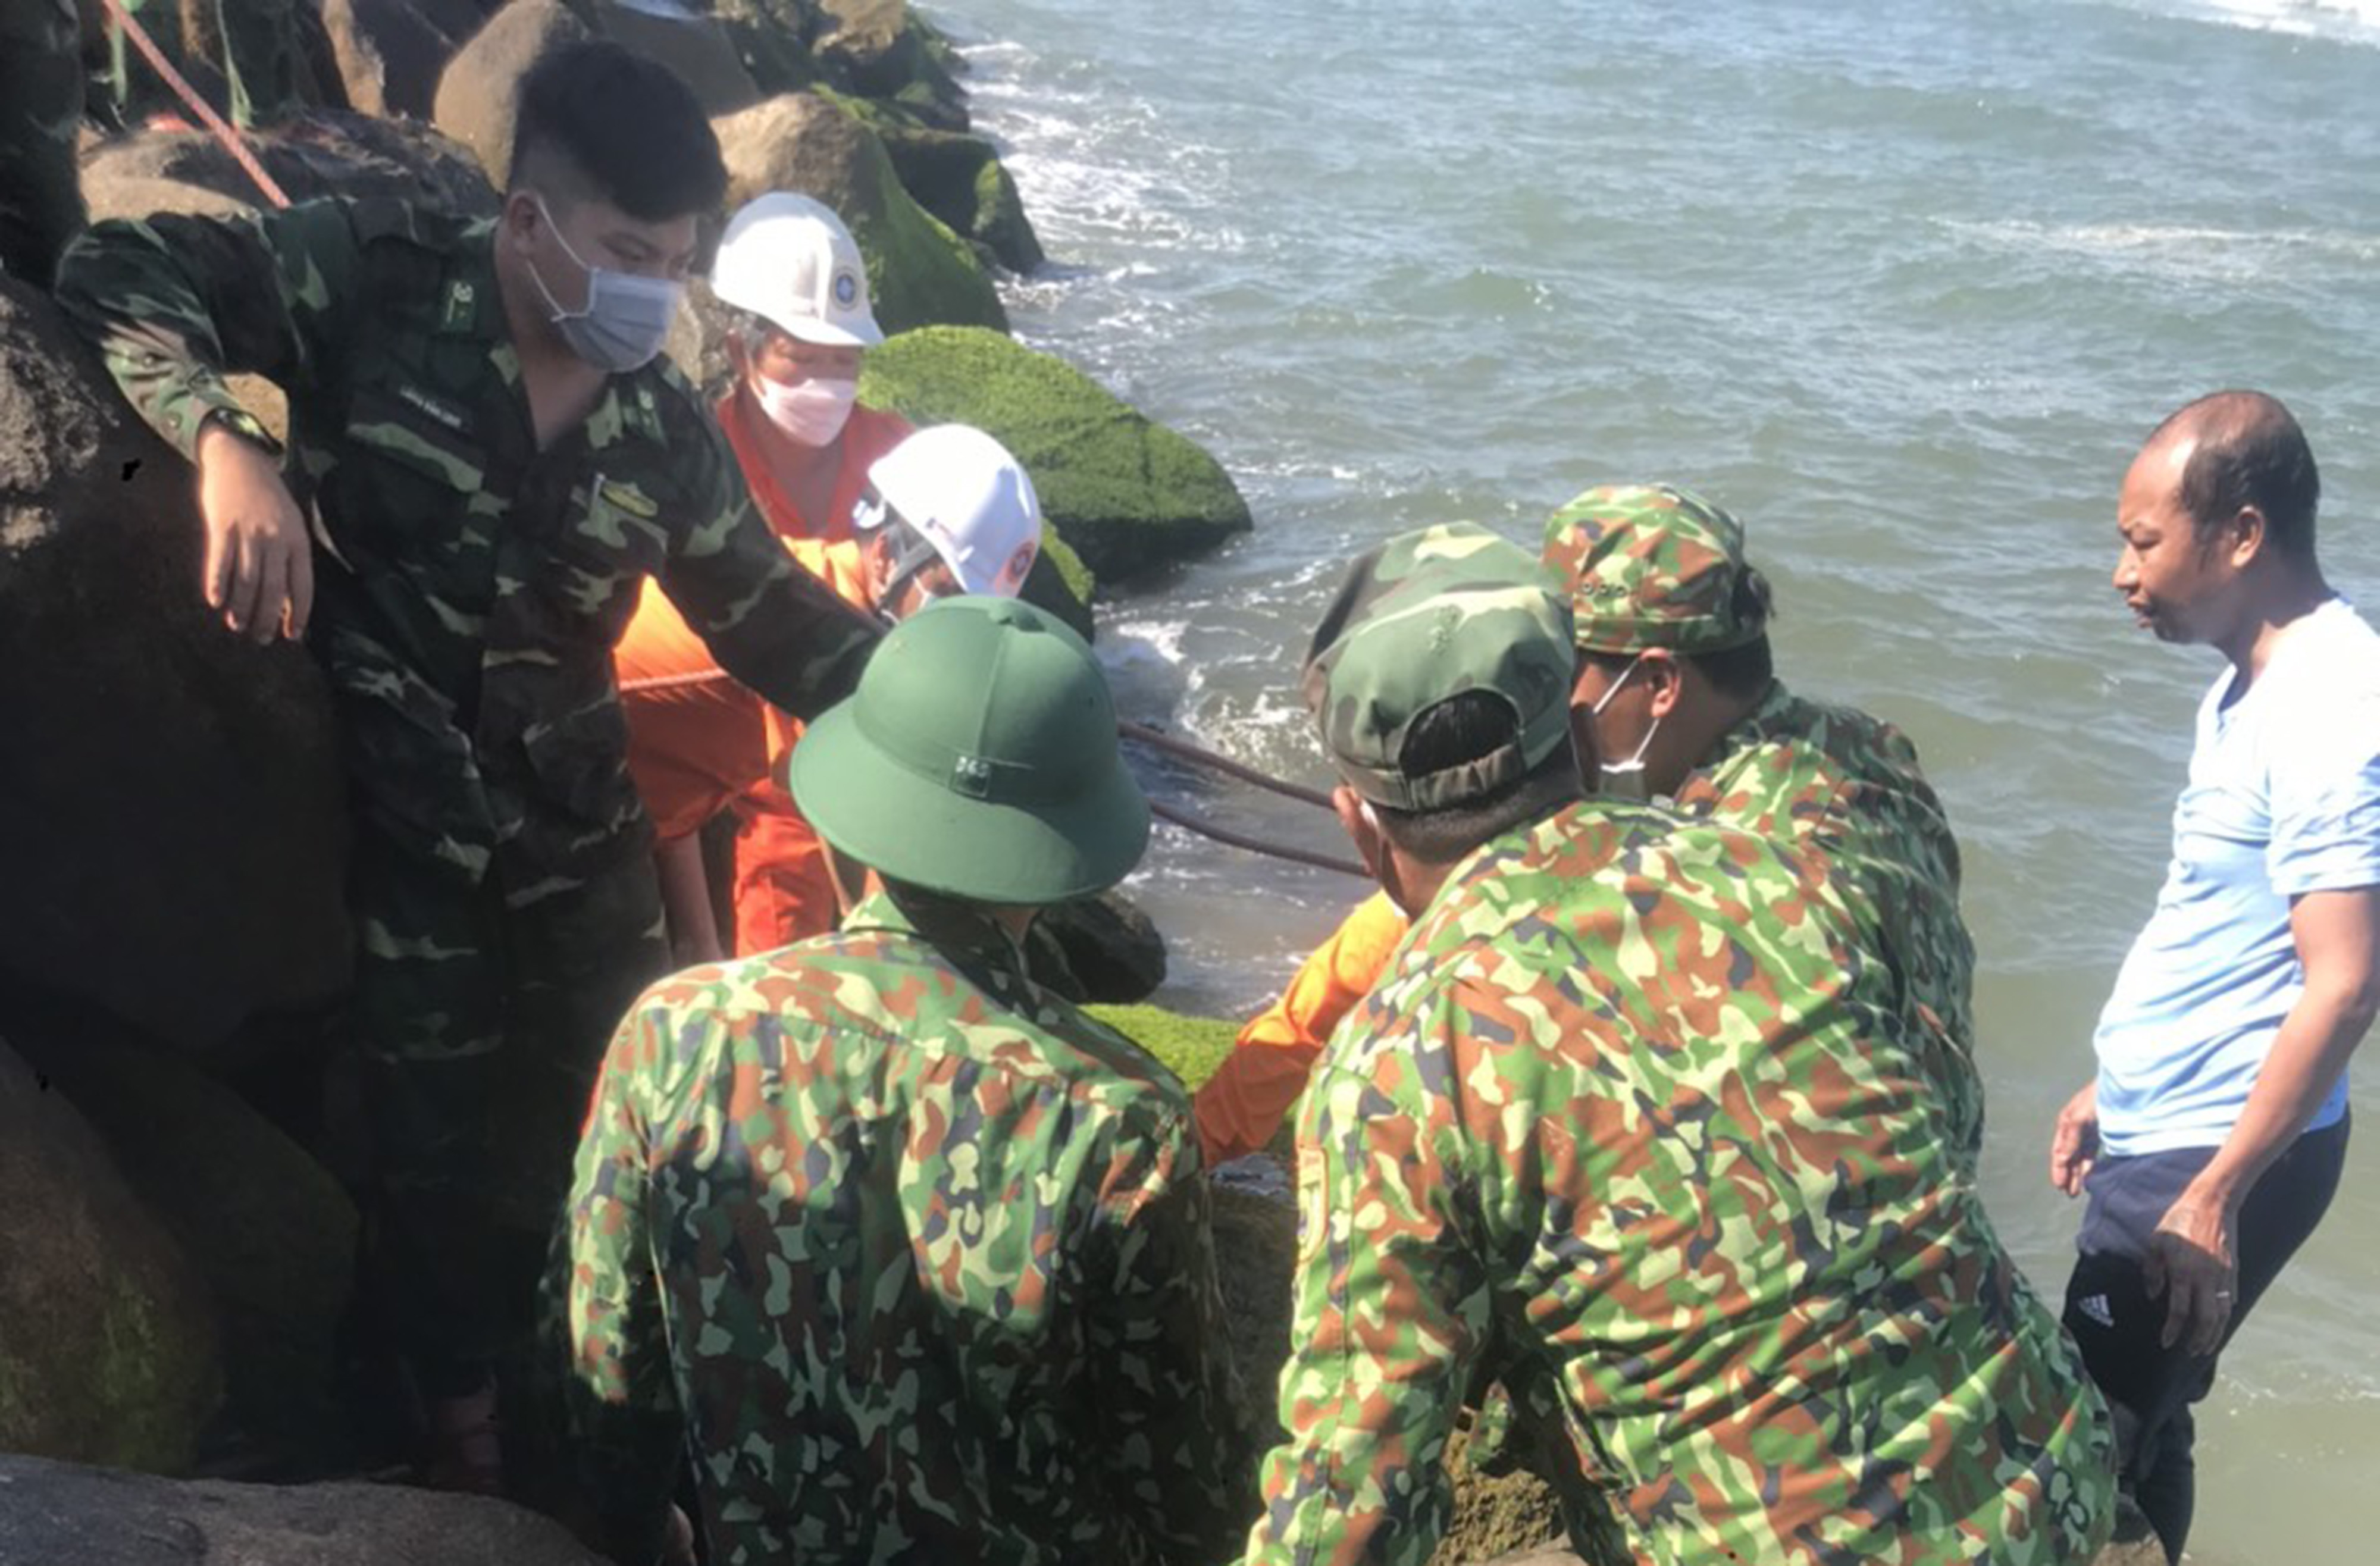 Authorities find bodies of last two victims from capsized boat off central Vietnam